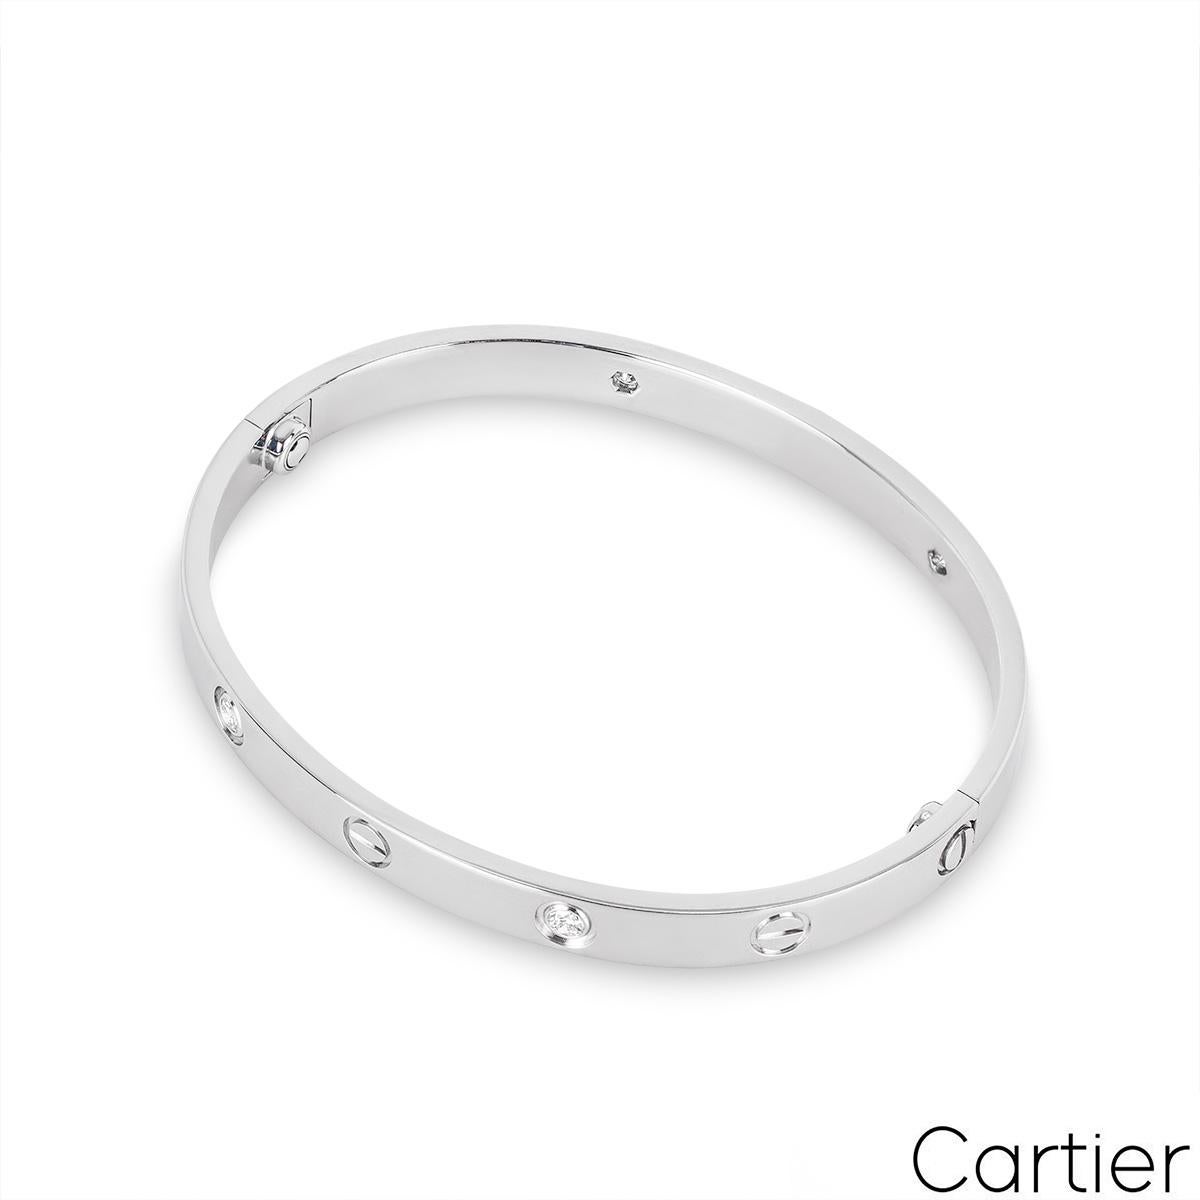 Cartier White Gold Half Diamond Love Bracelet Size 18 B6035818 In Excellent Condition For Sale In London, GB